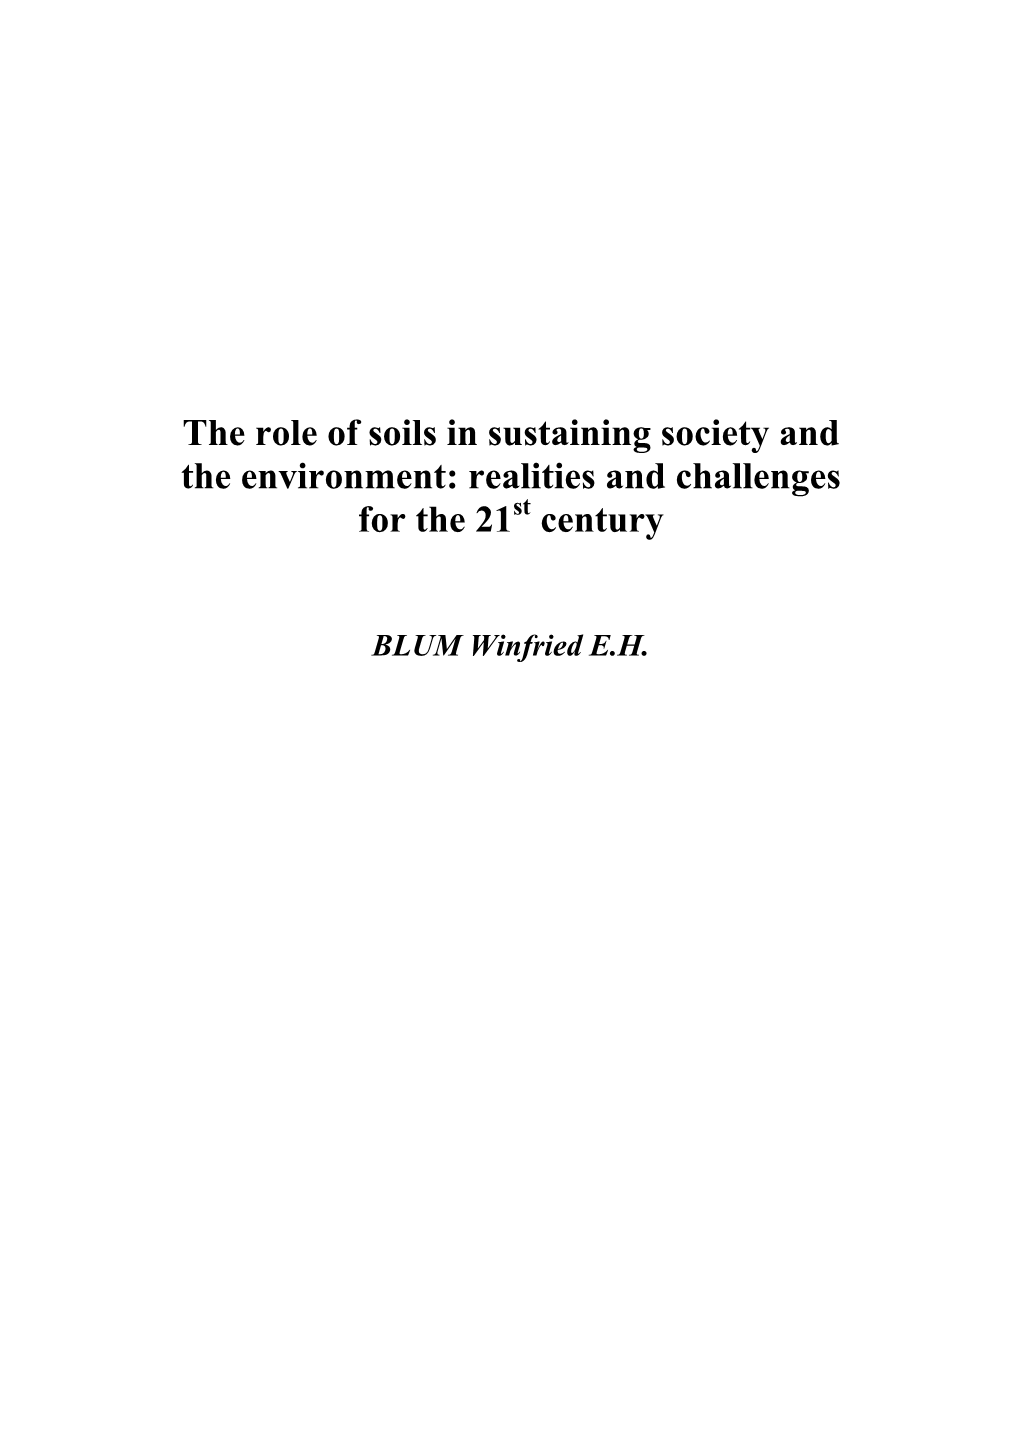 The Role of Soils in Sustaining Society and the Environment: Realities and Challenges for the 21St Century